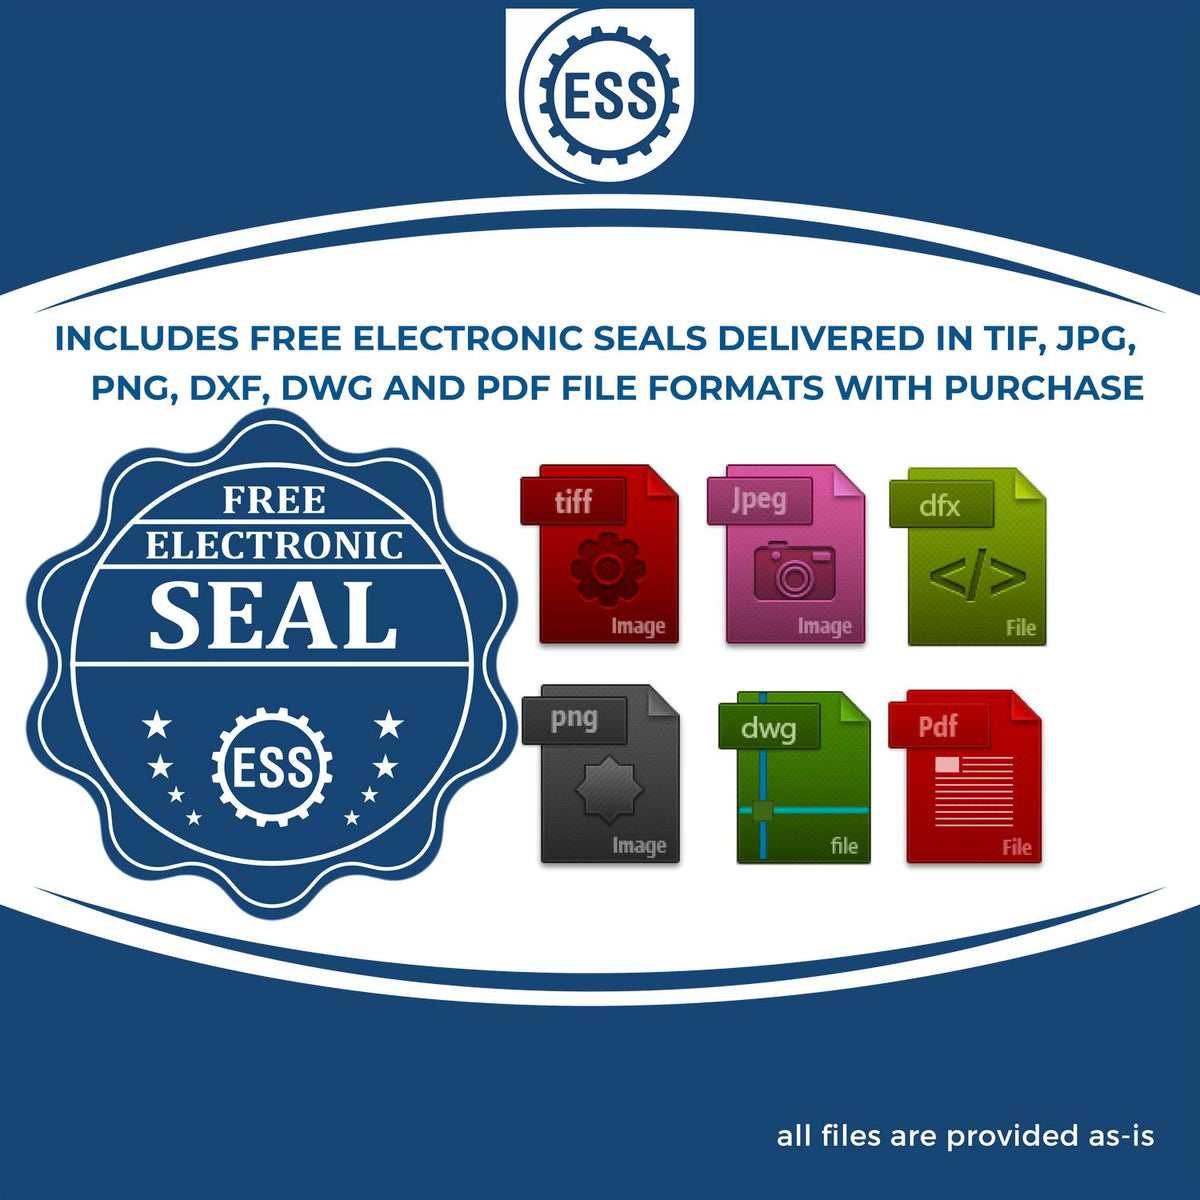 An infographic for the free electronic seal for the Gift Tennessee Geologist Seal illustrating the different file type icons such as DXF, DWG, TIF, JPG and PNG.